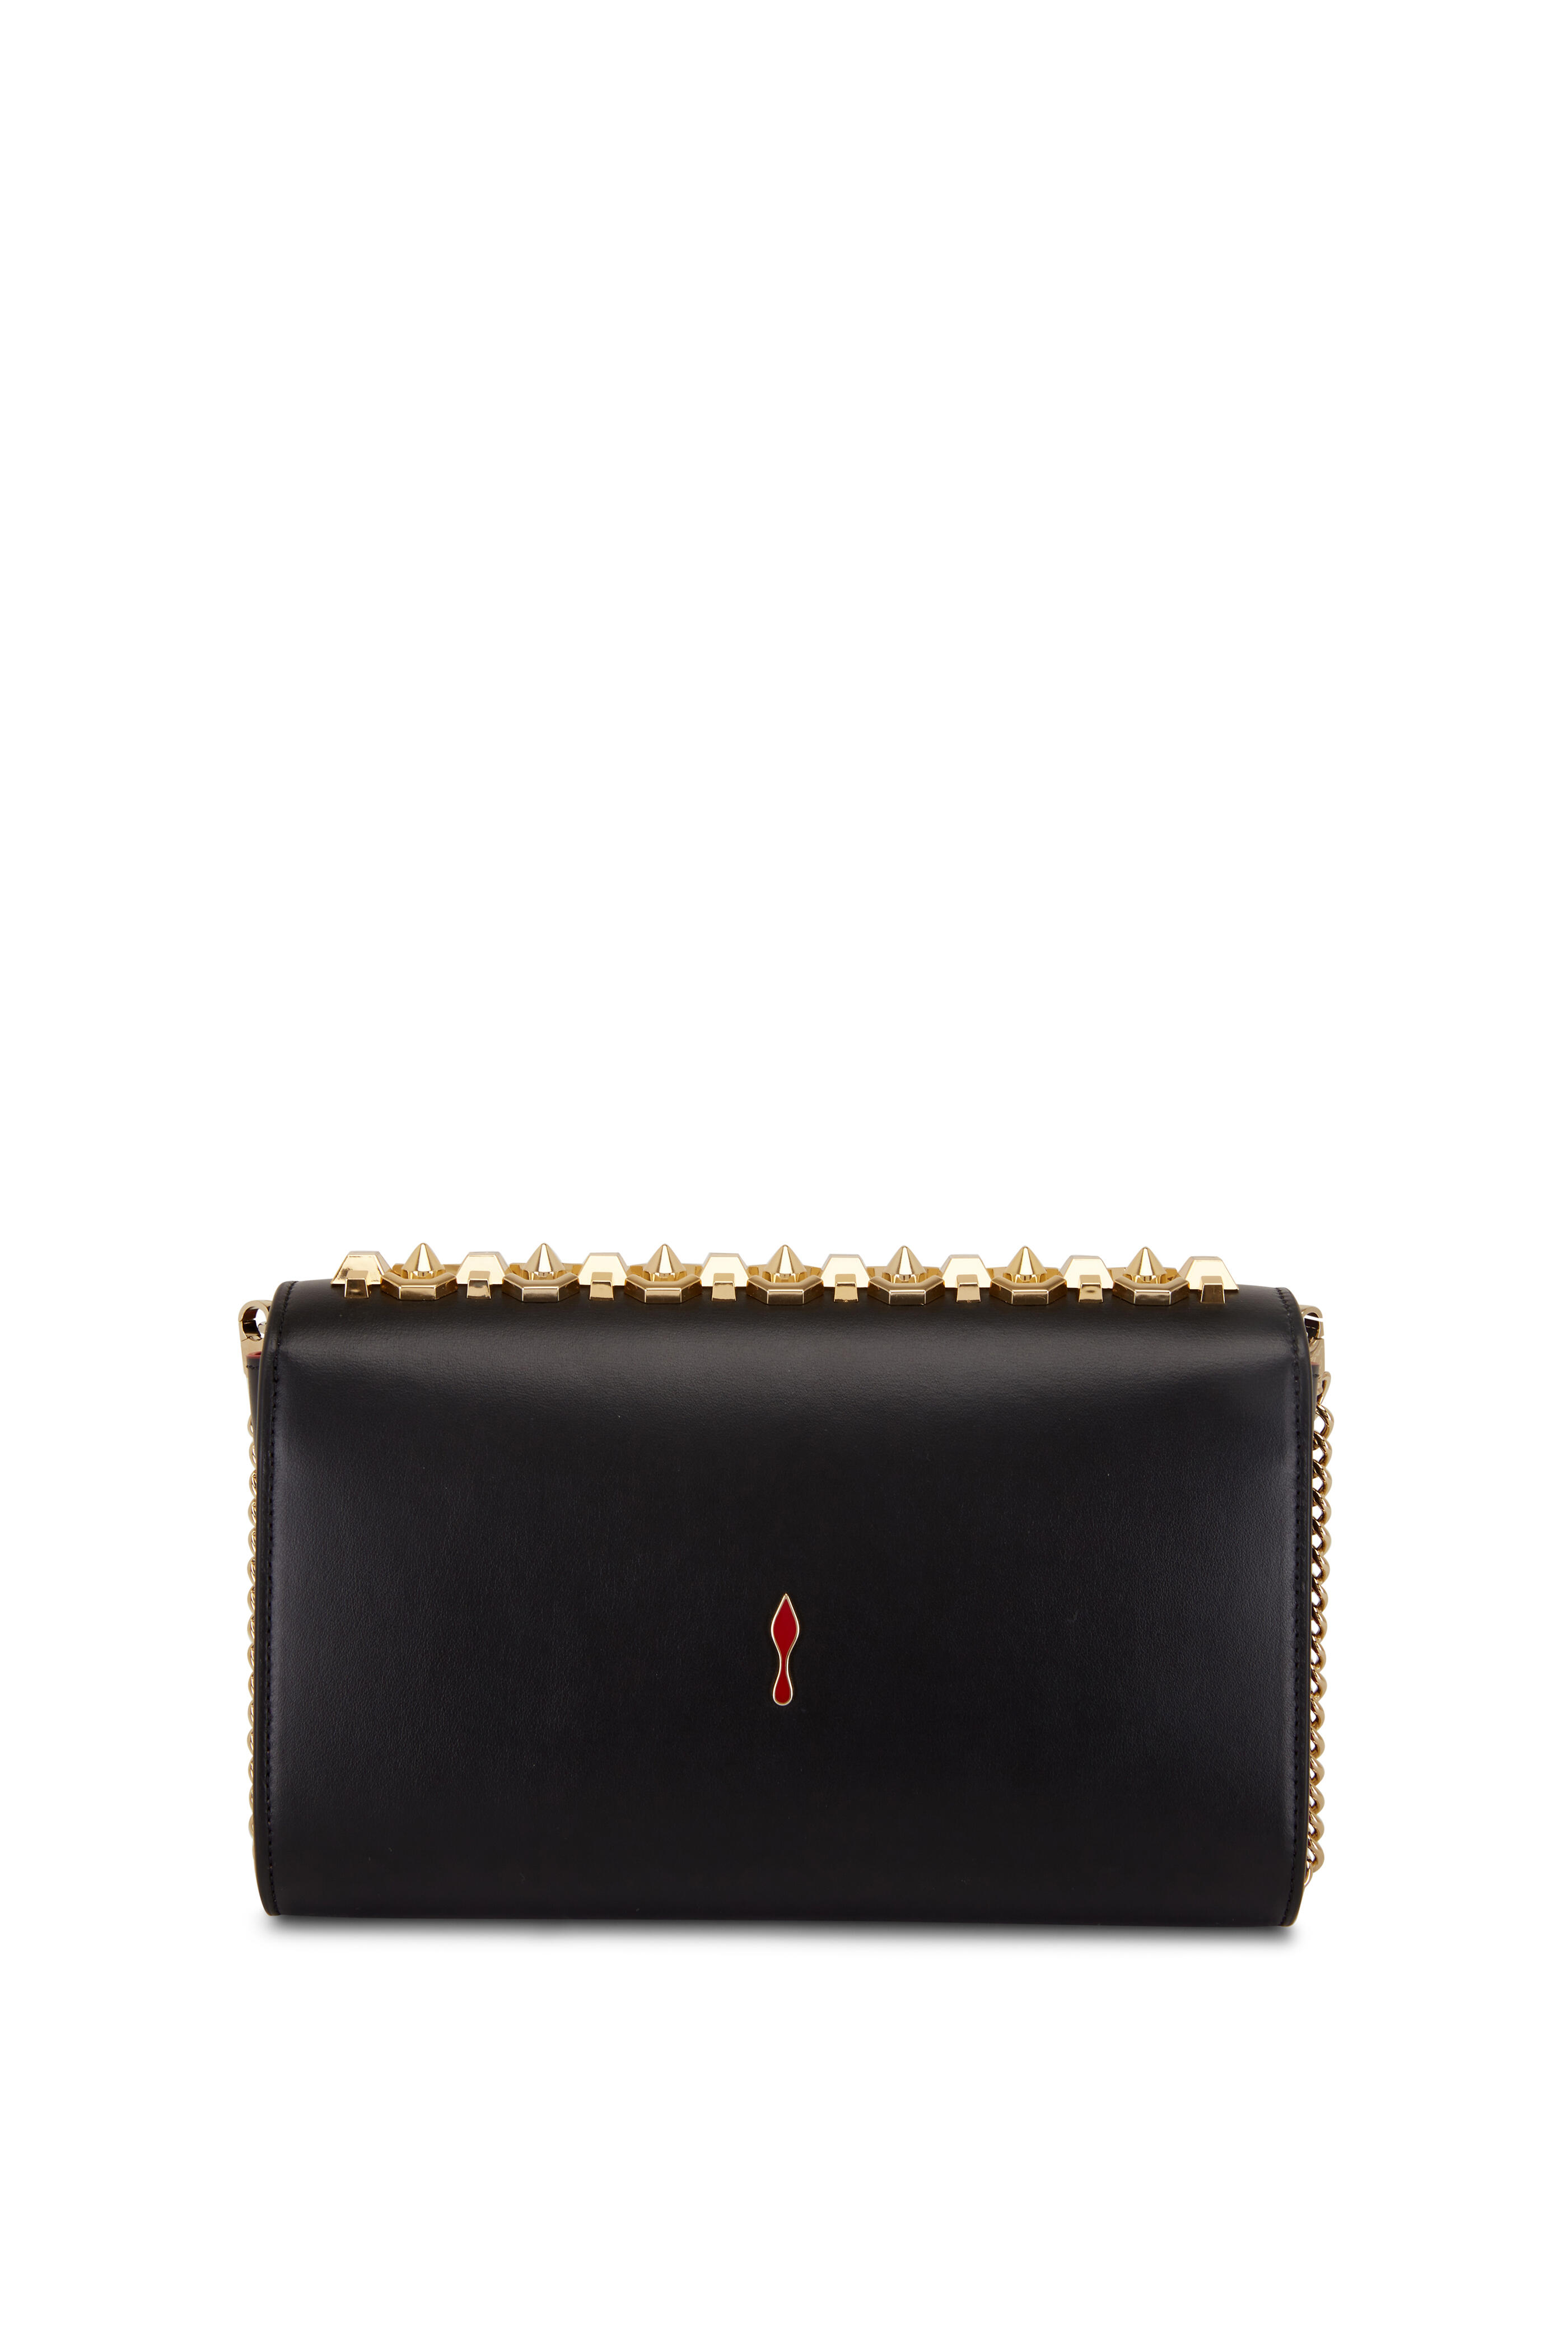 Christian Louboutin Empire Square Spiked Wallet in Black for Men